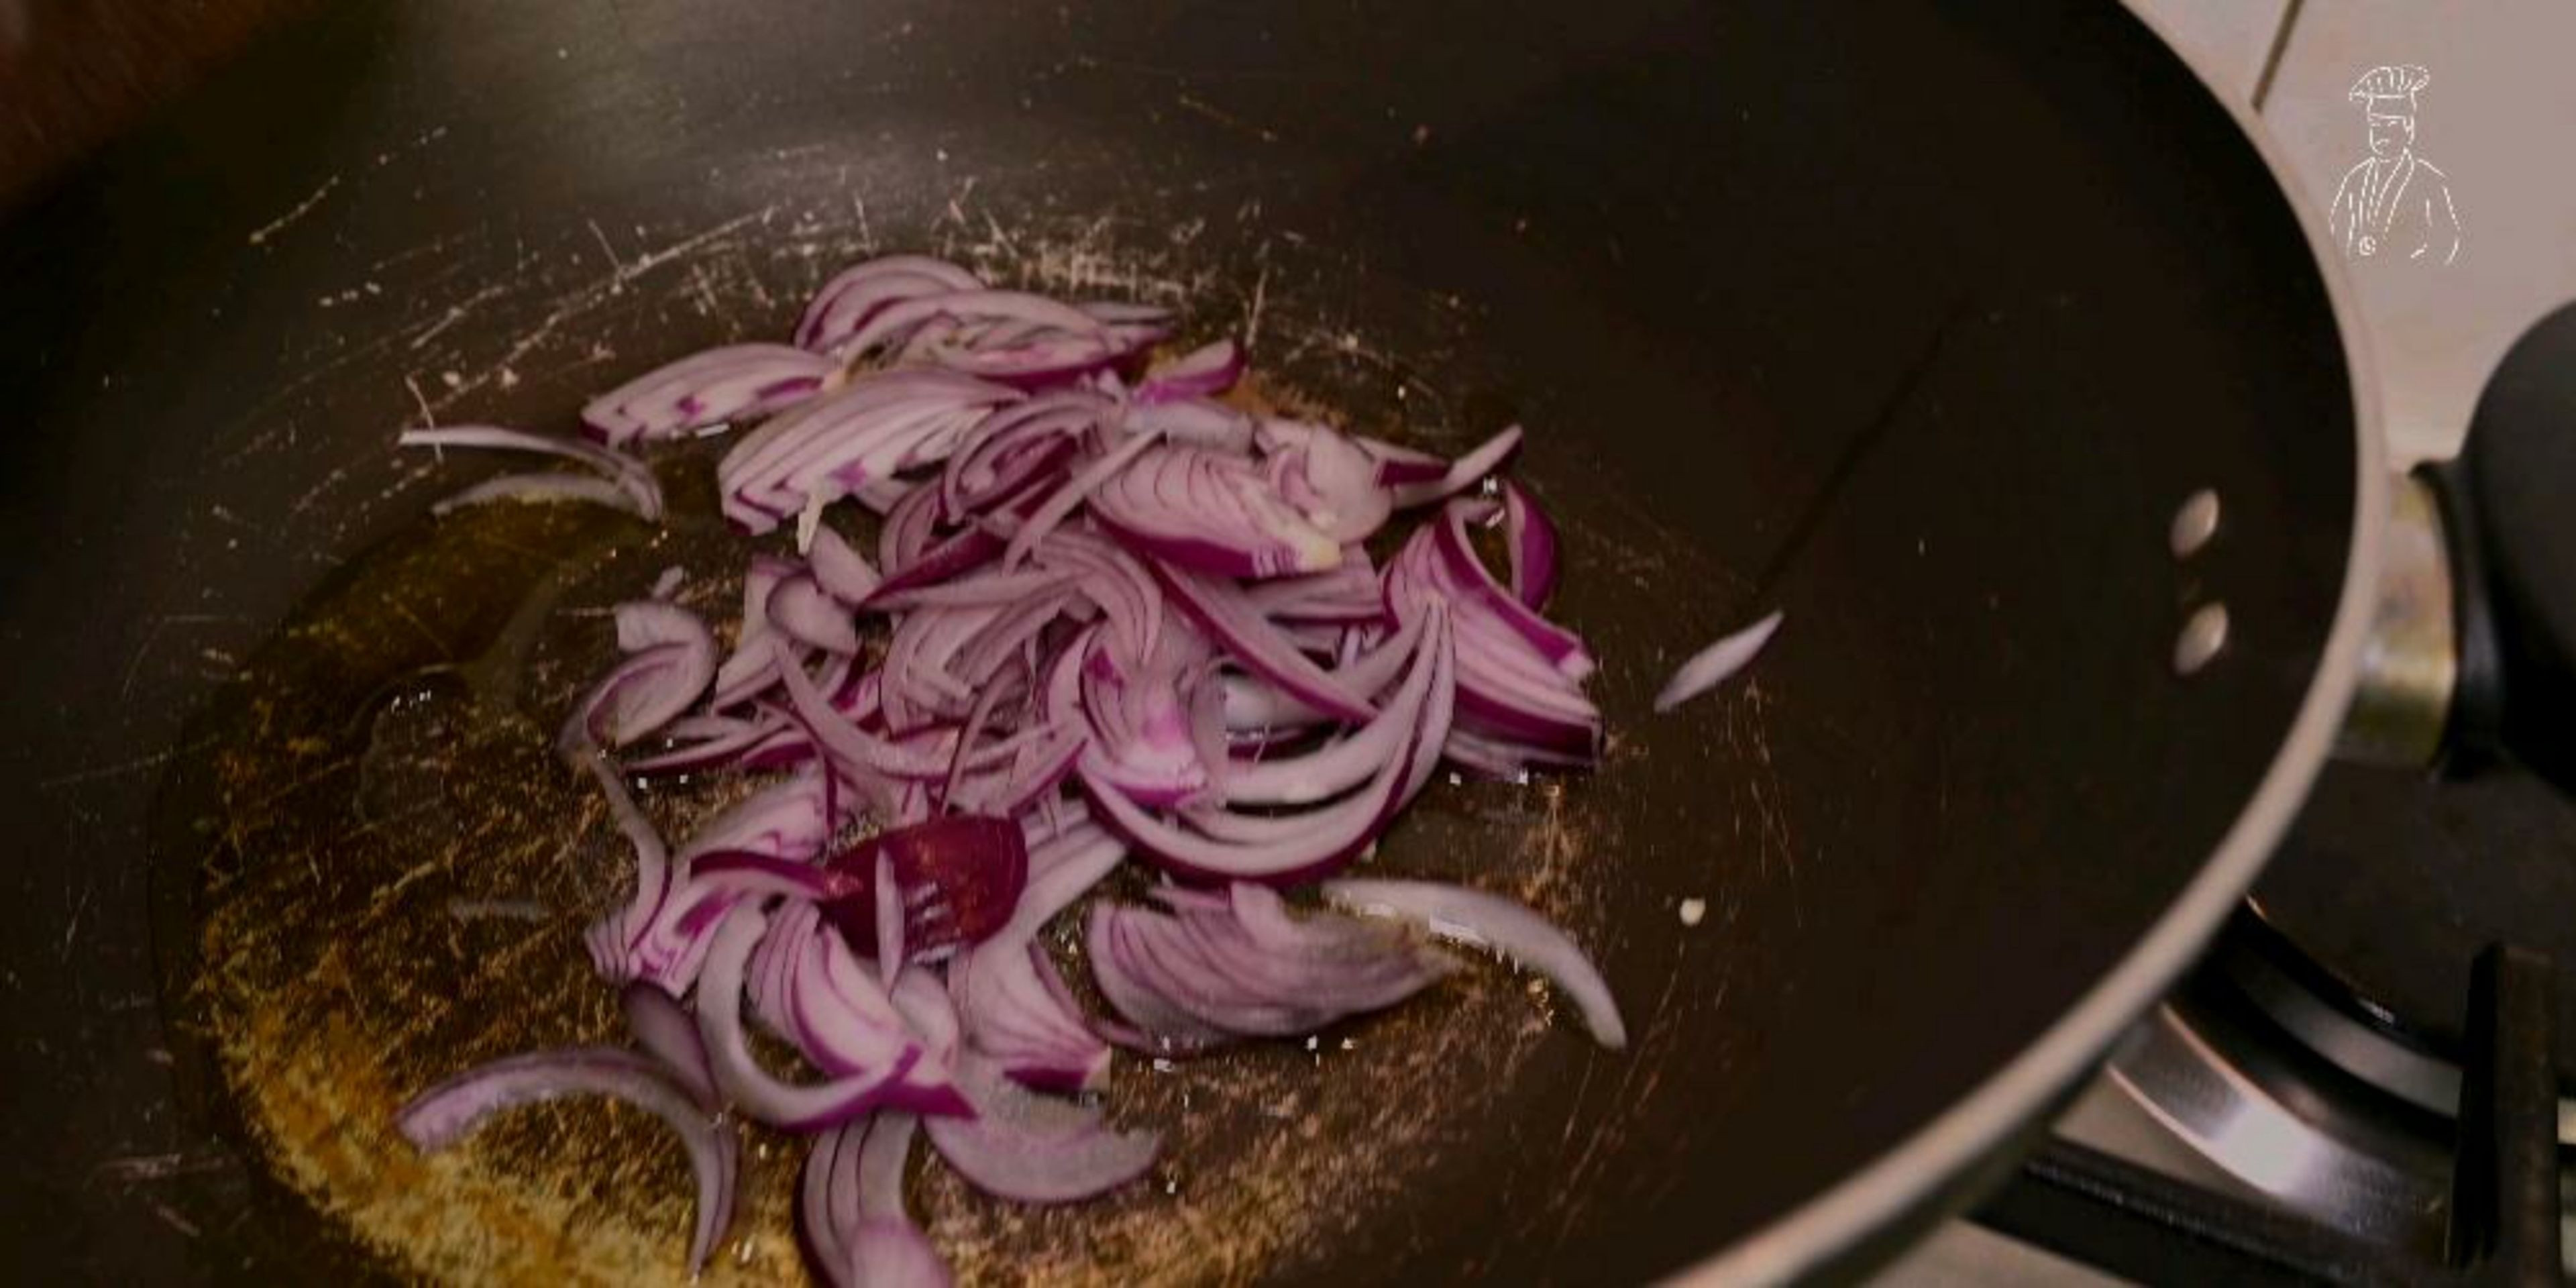 In a large wok, heat 1 tbsp. of olive oil and simmer the onions for 1-2 minutes. 

Then add the garlic and green chillies and mix the ingredients together and simmer for another 2-3 minutes.